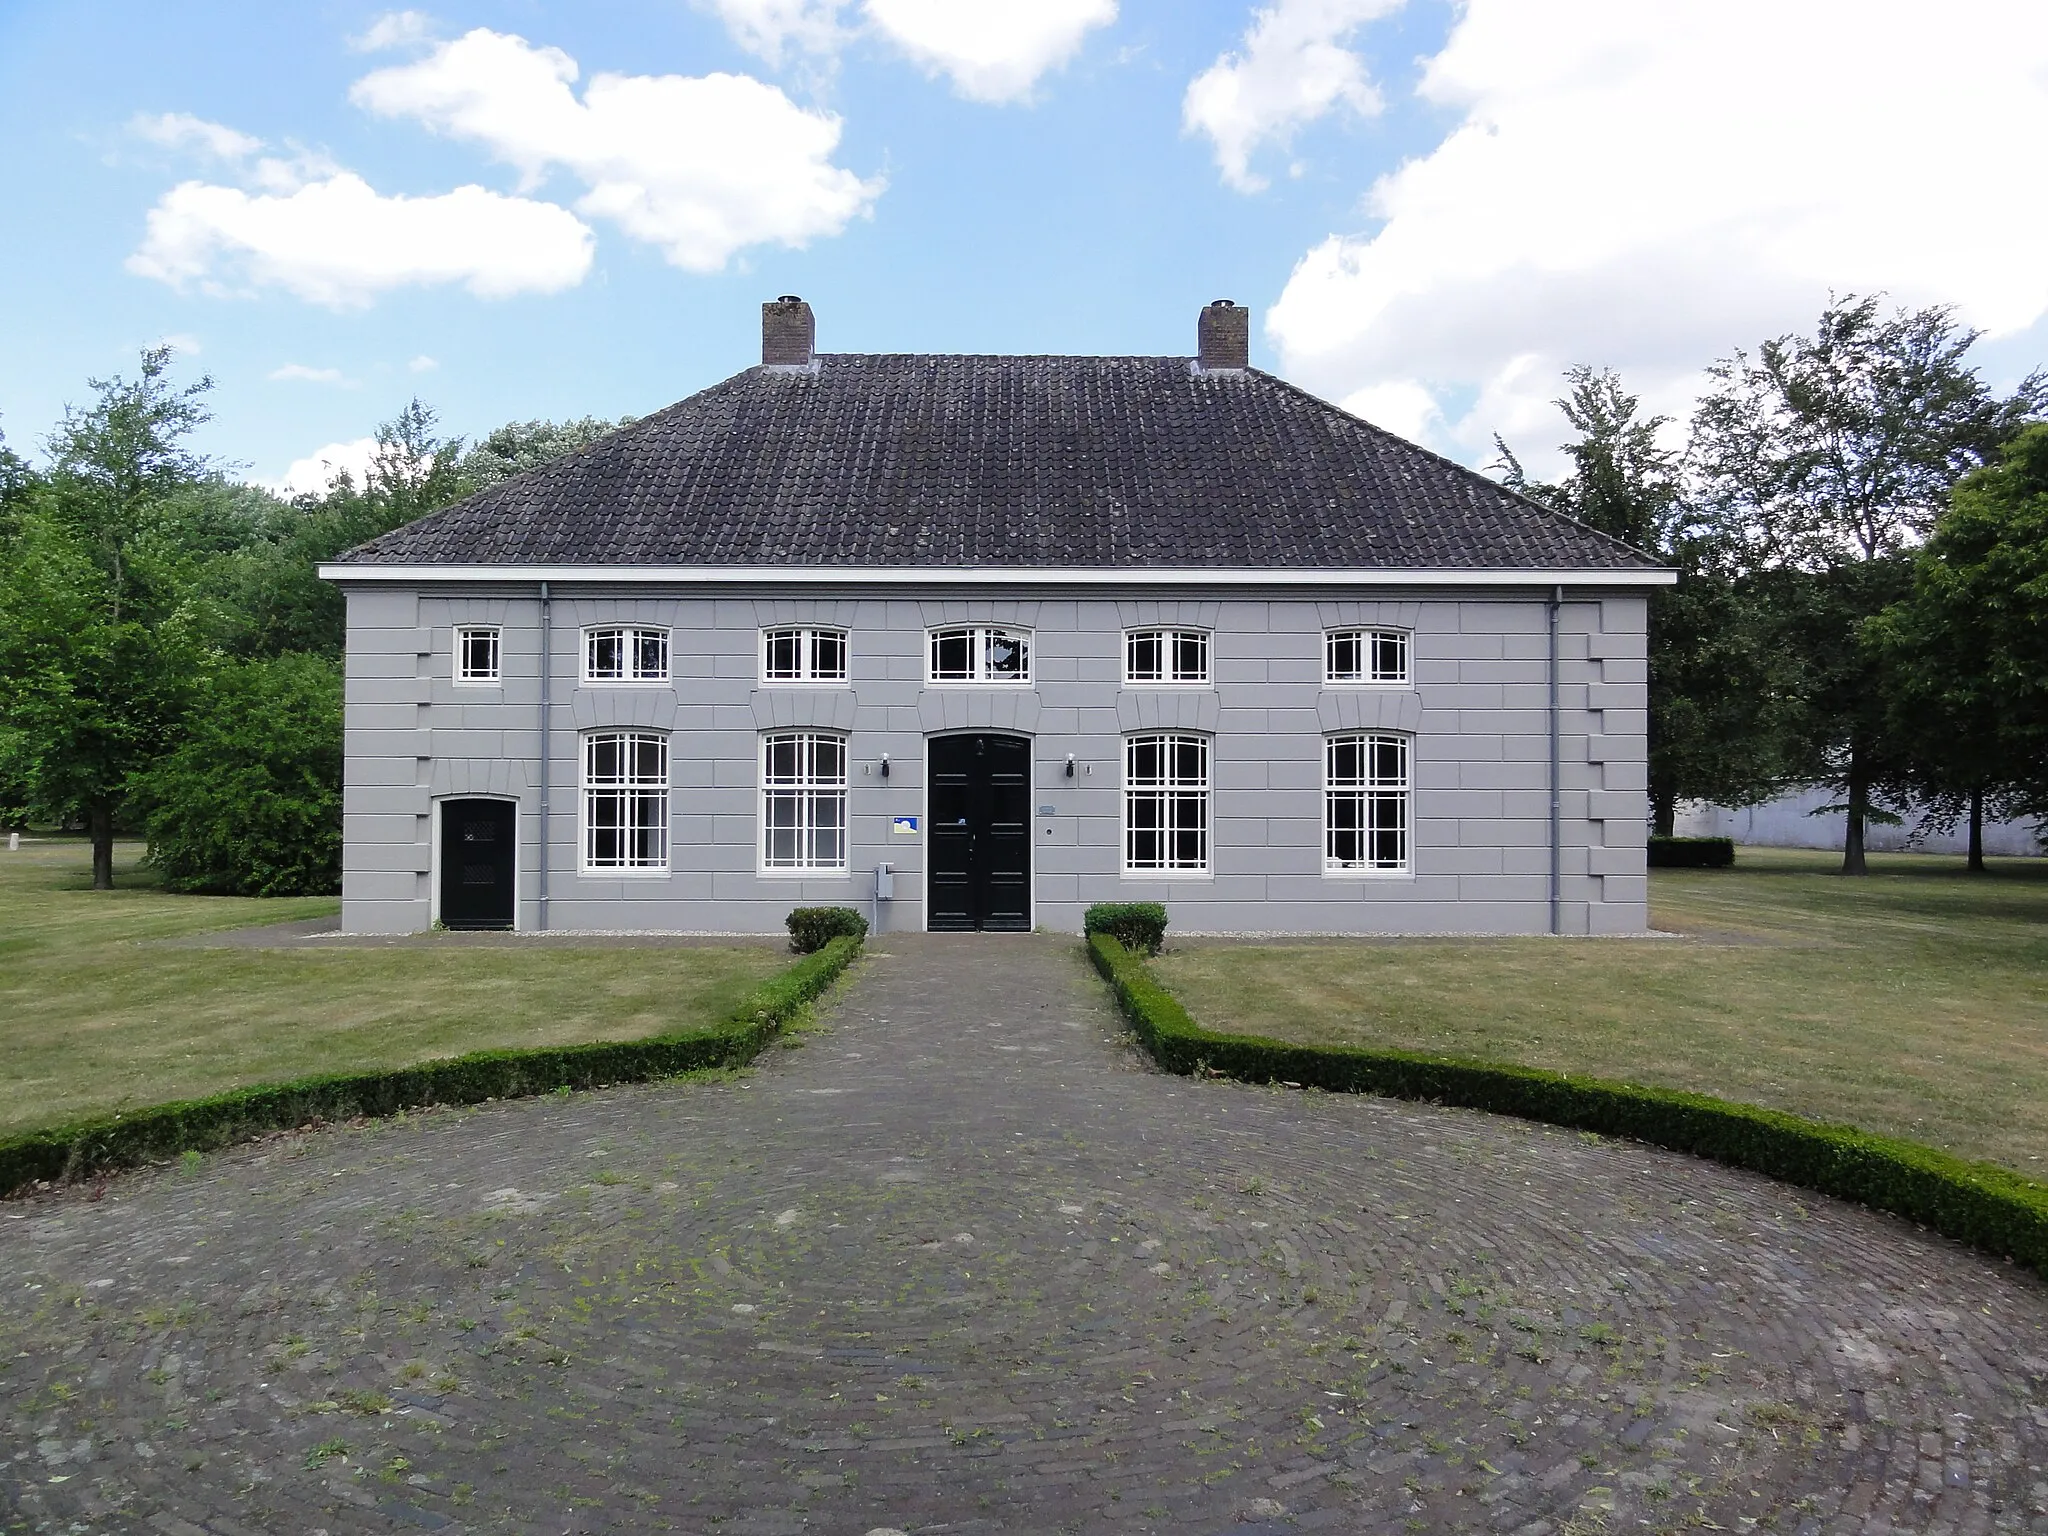 Photo showing: This is an image of rijksmonument number 9771